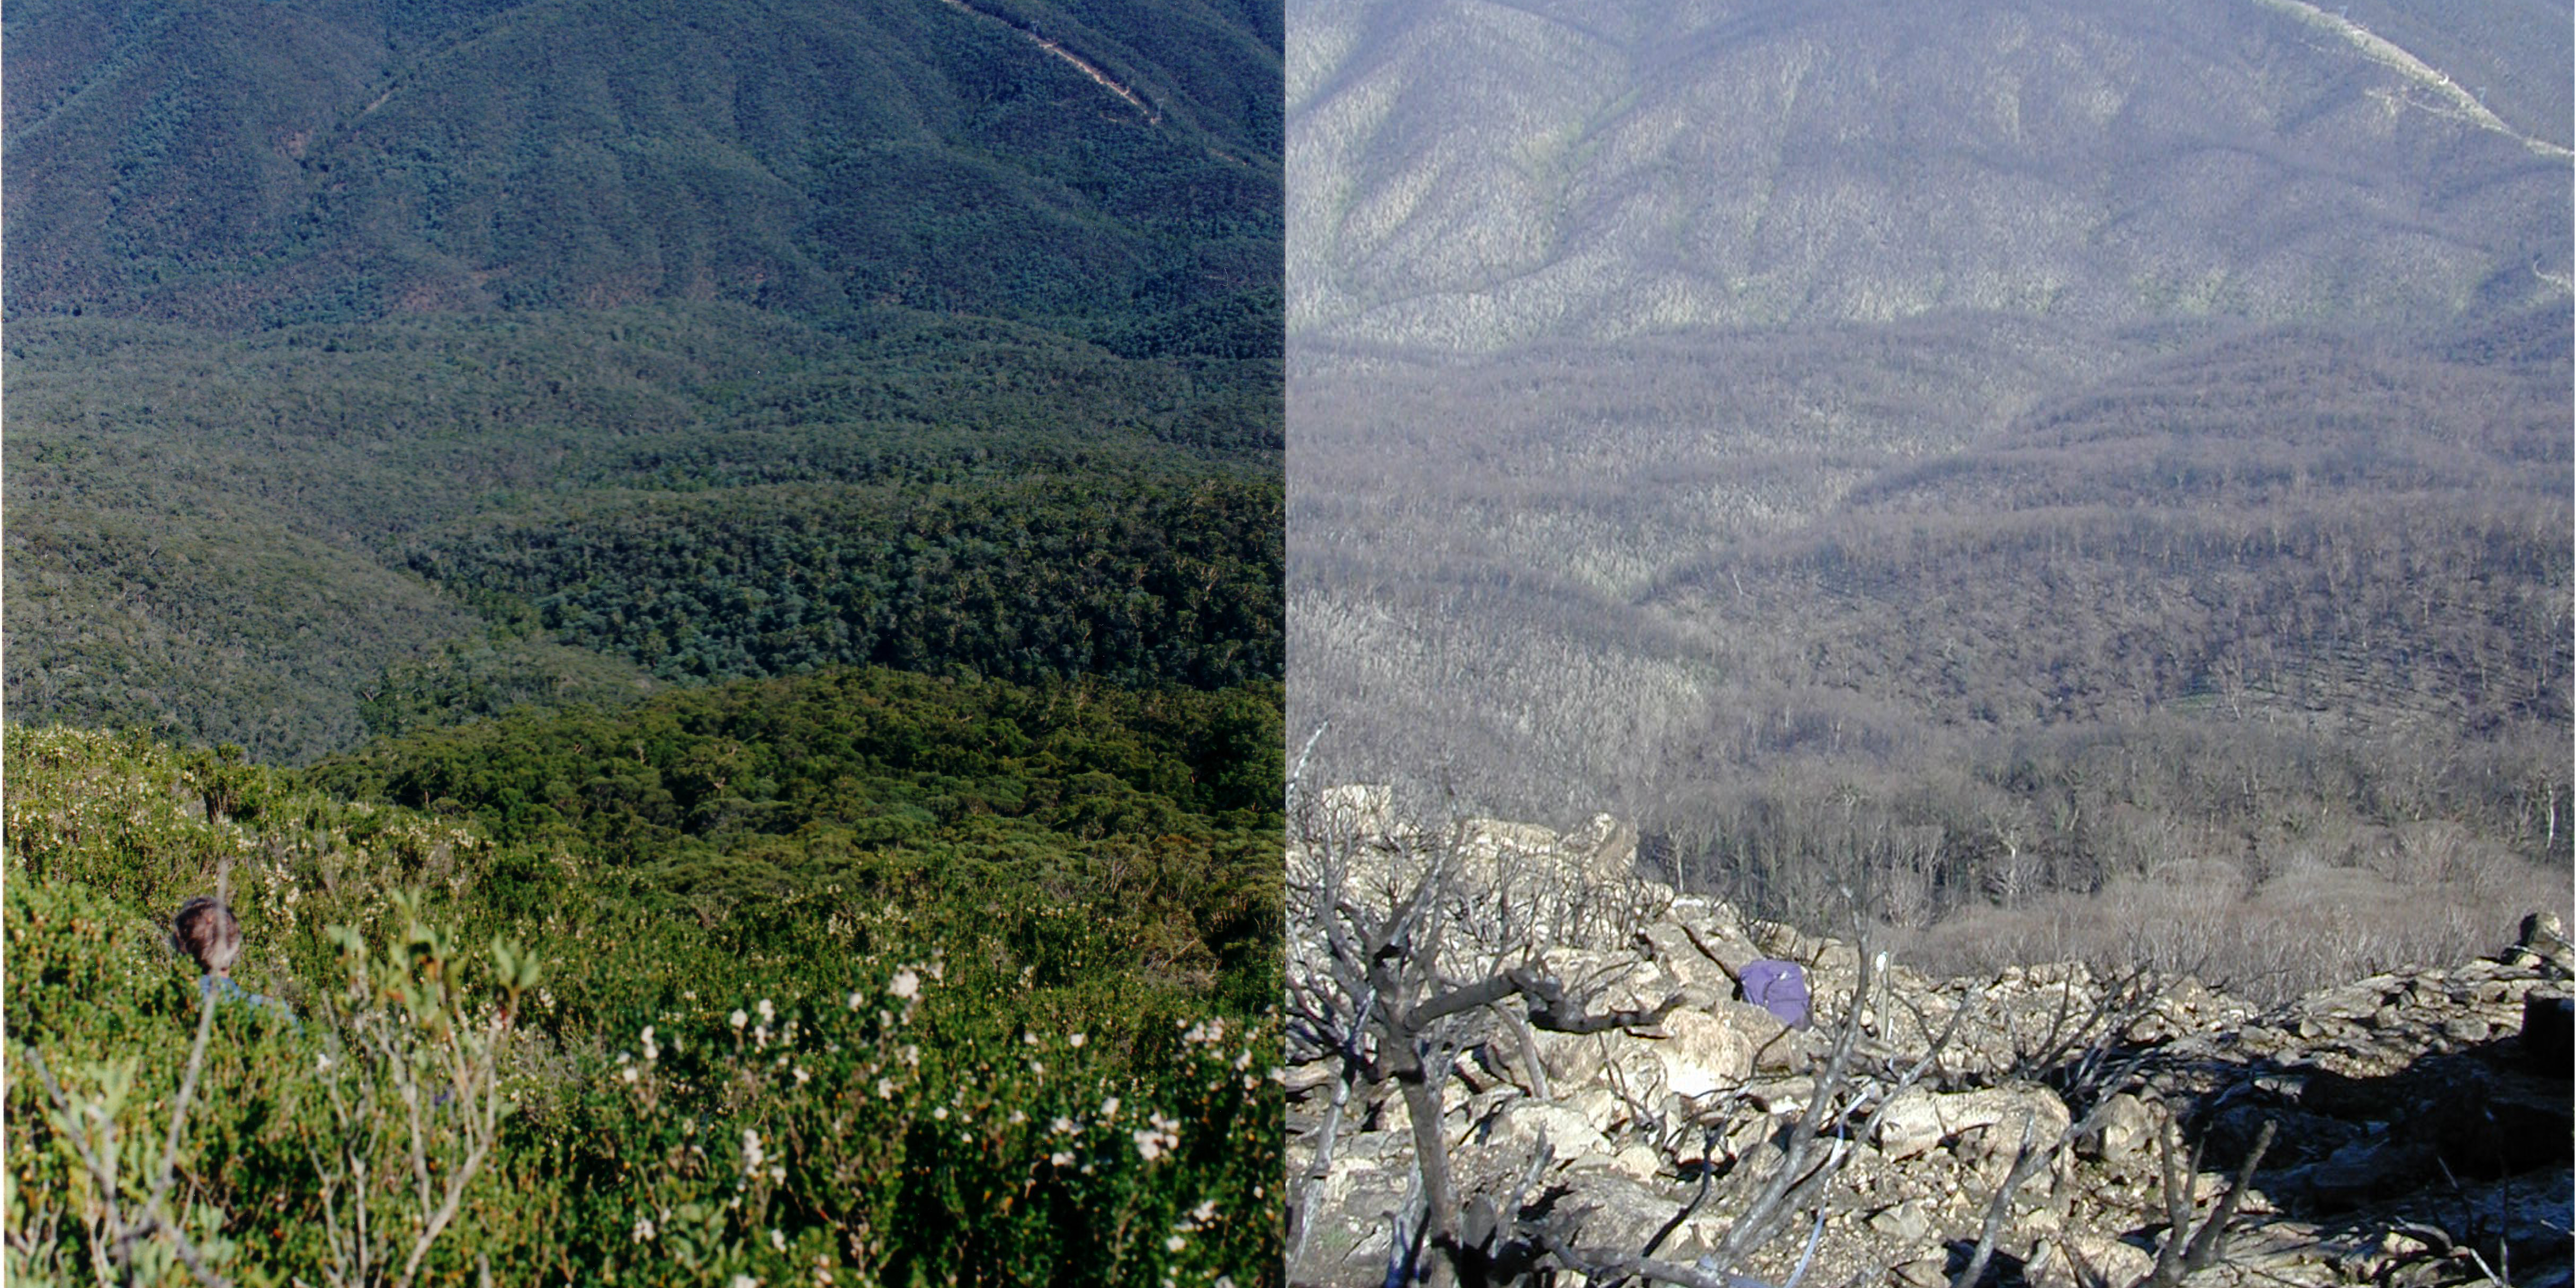 Two images side by side depicting a green mountainous landscape on the left and the same landscape burnt and barren on the right